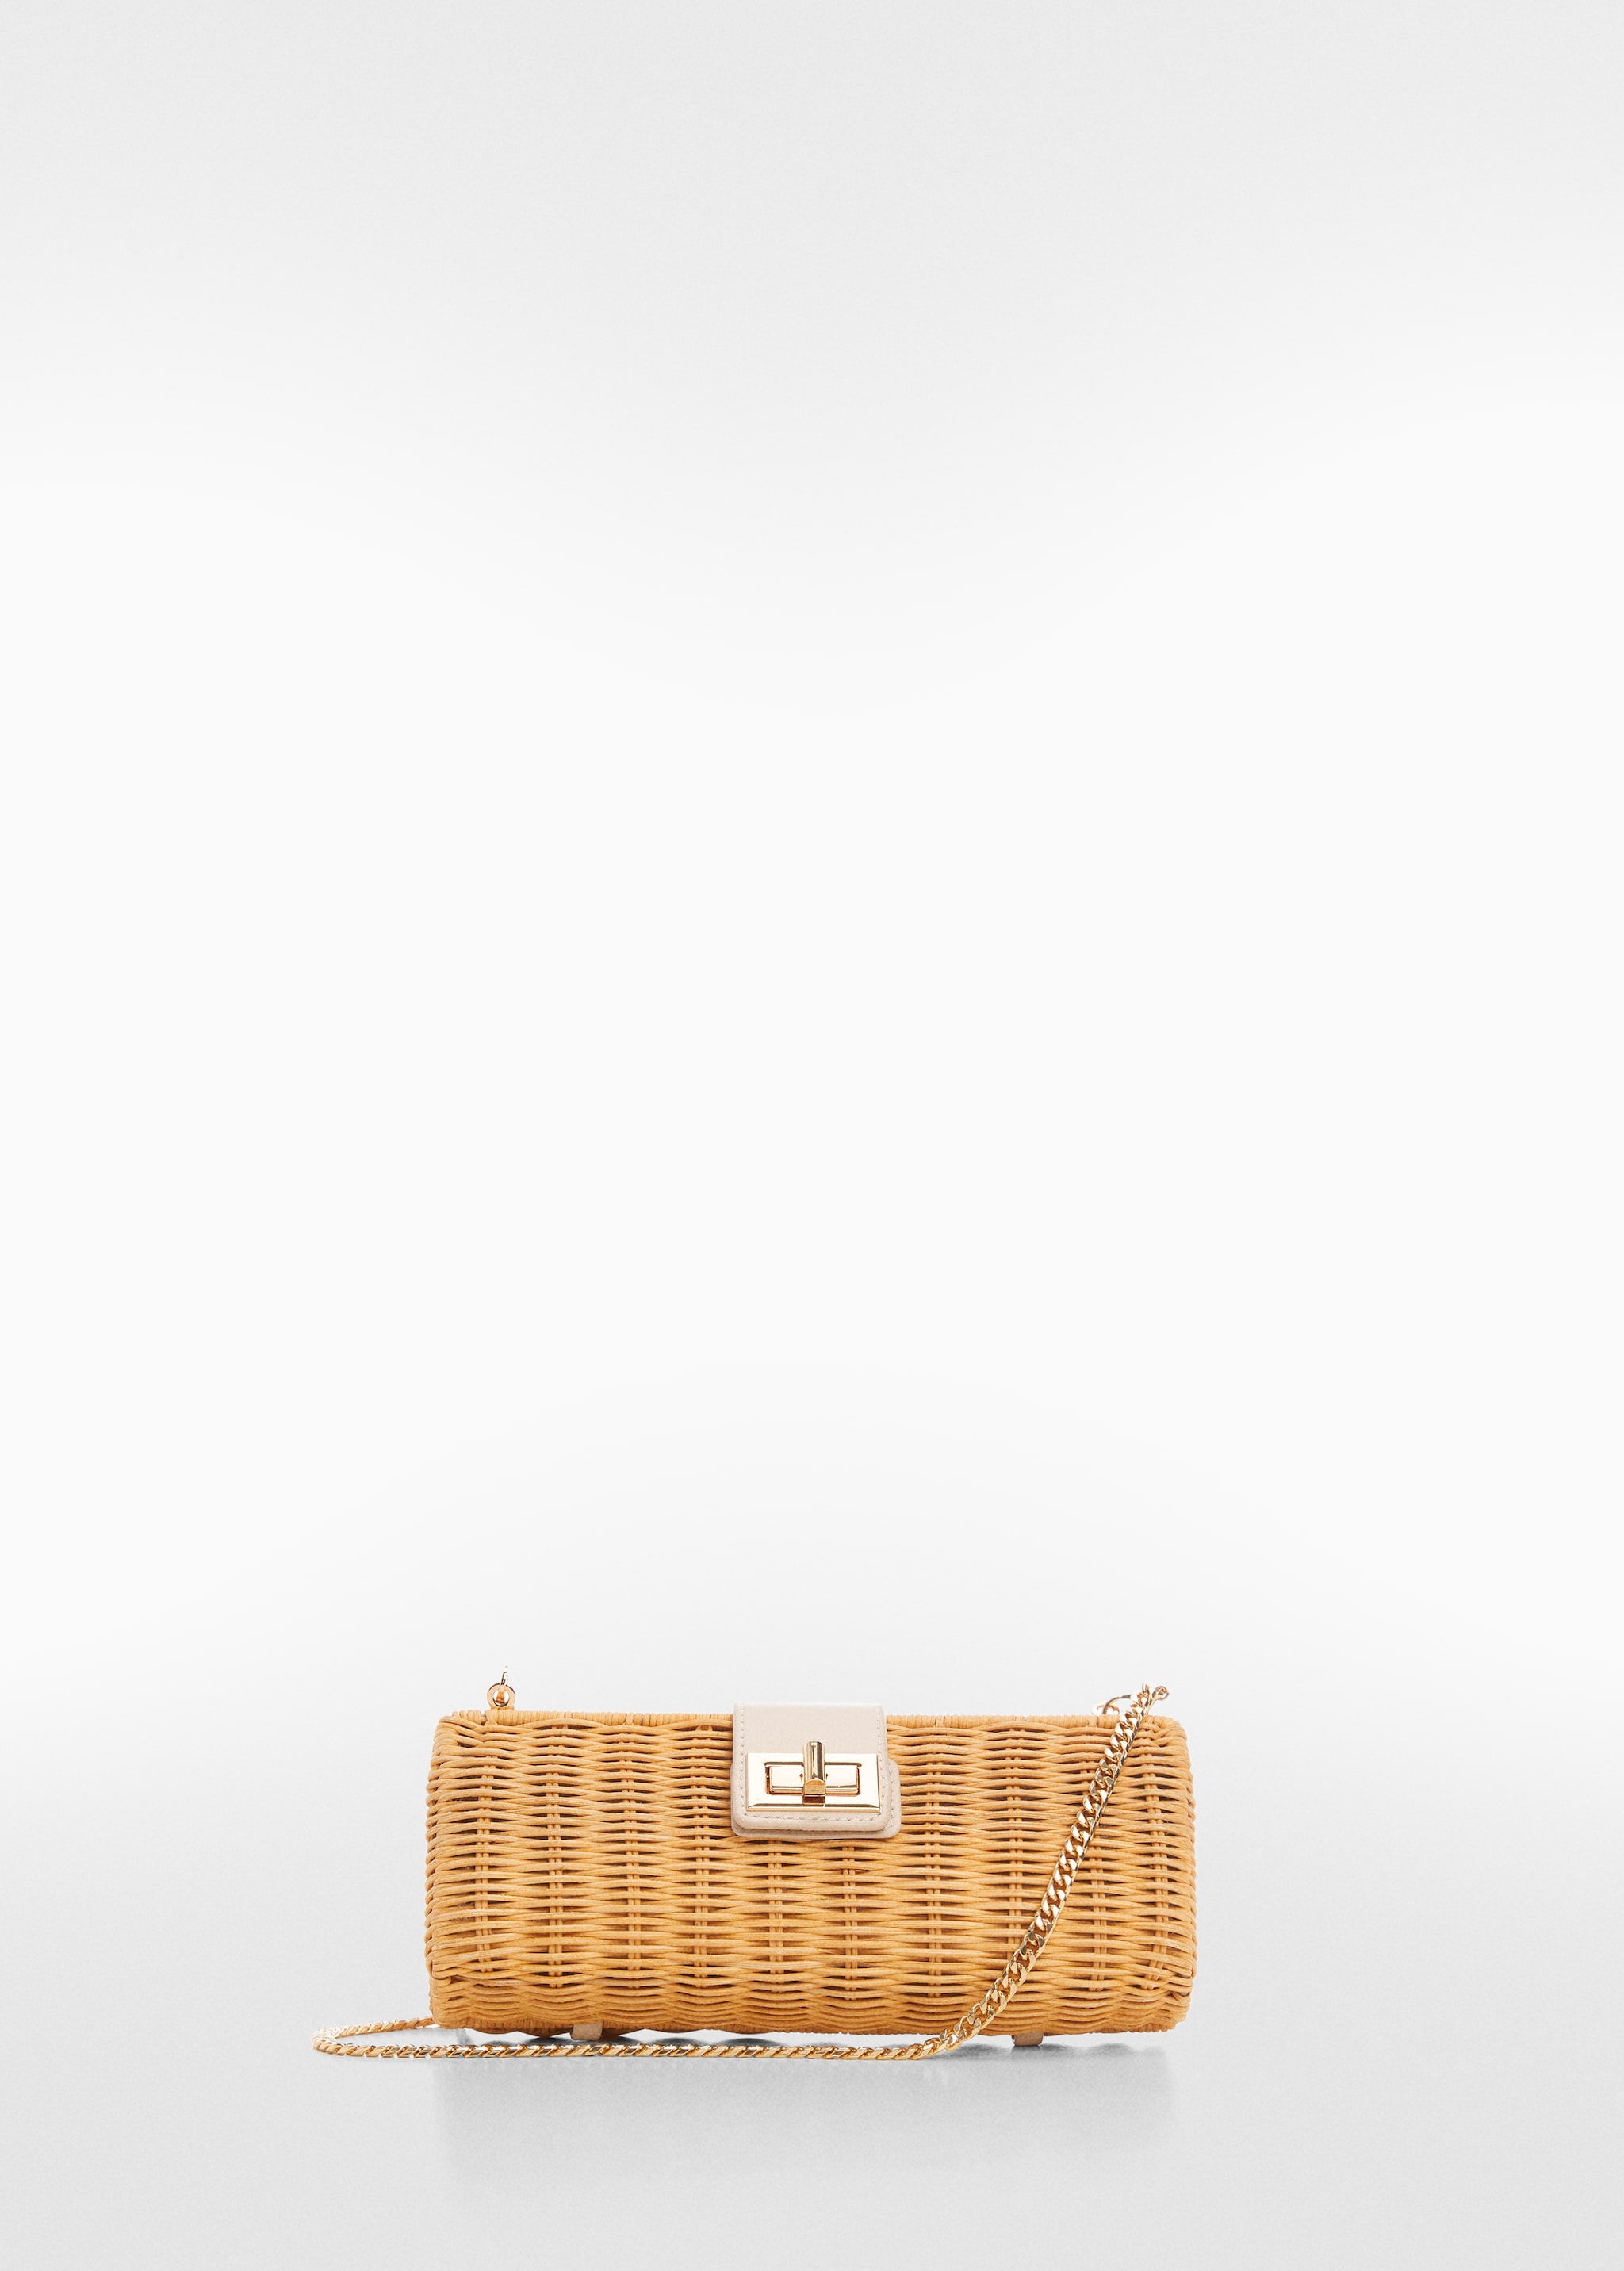 Rattan clutch bag - Article without model